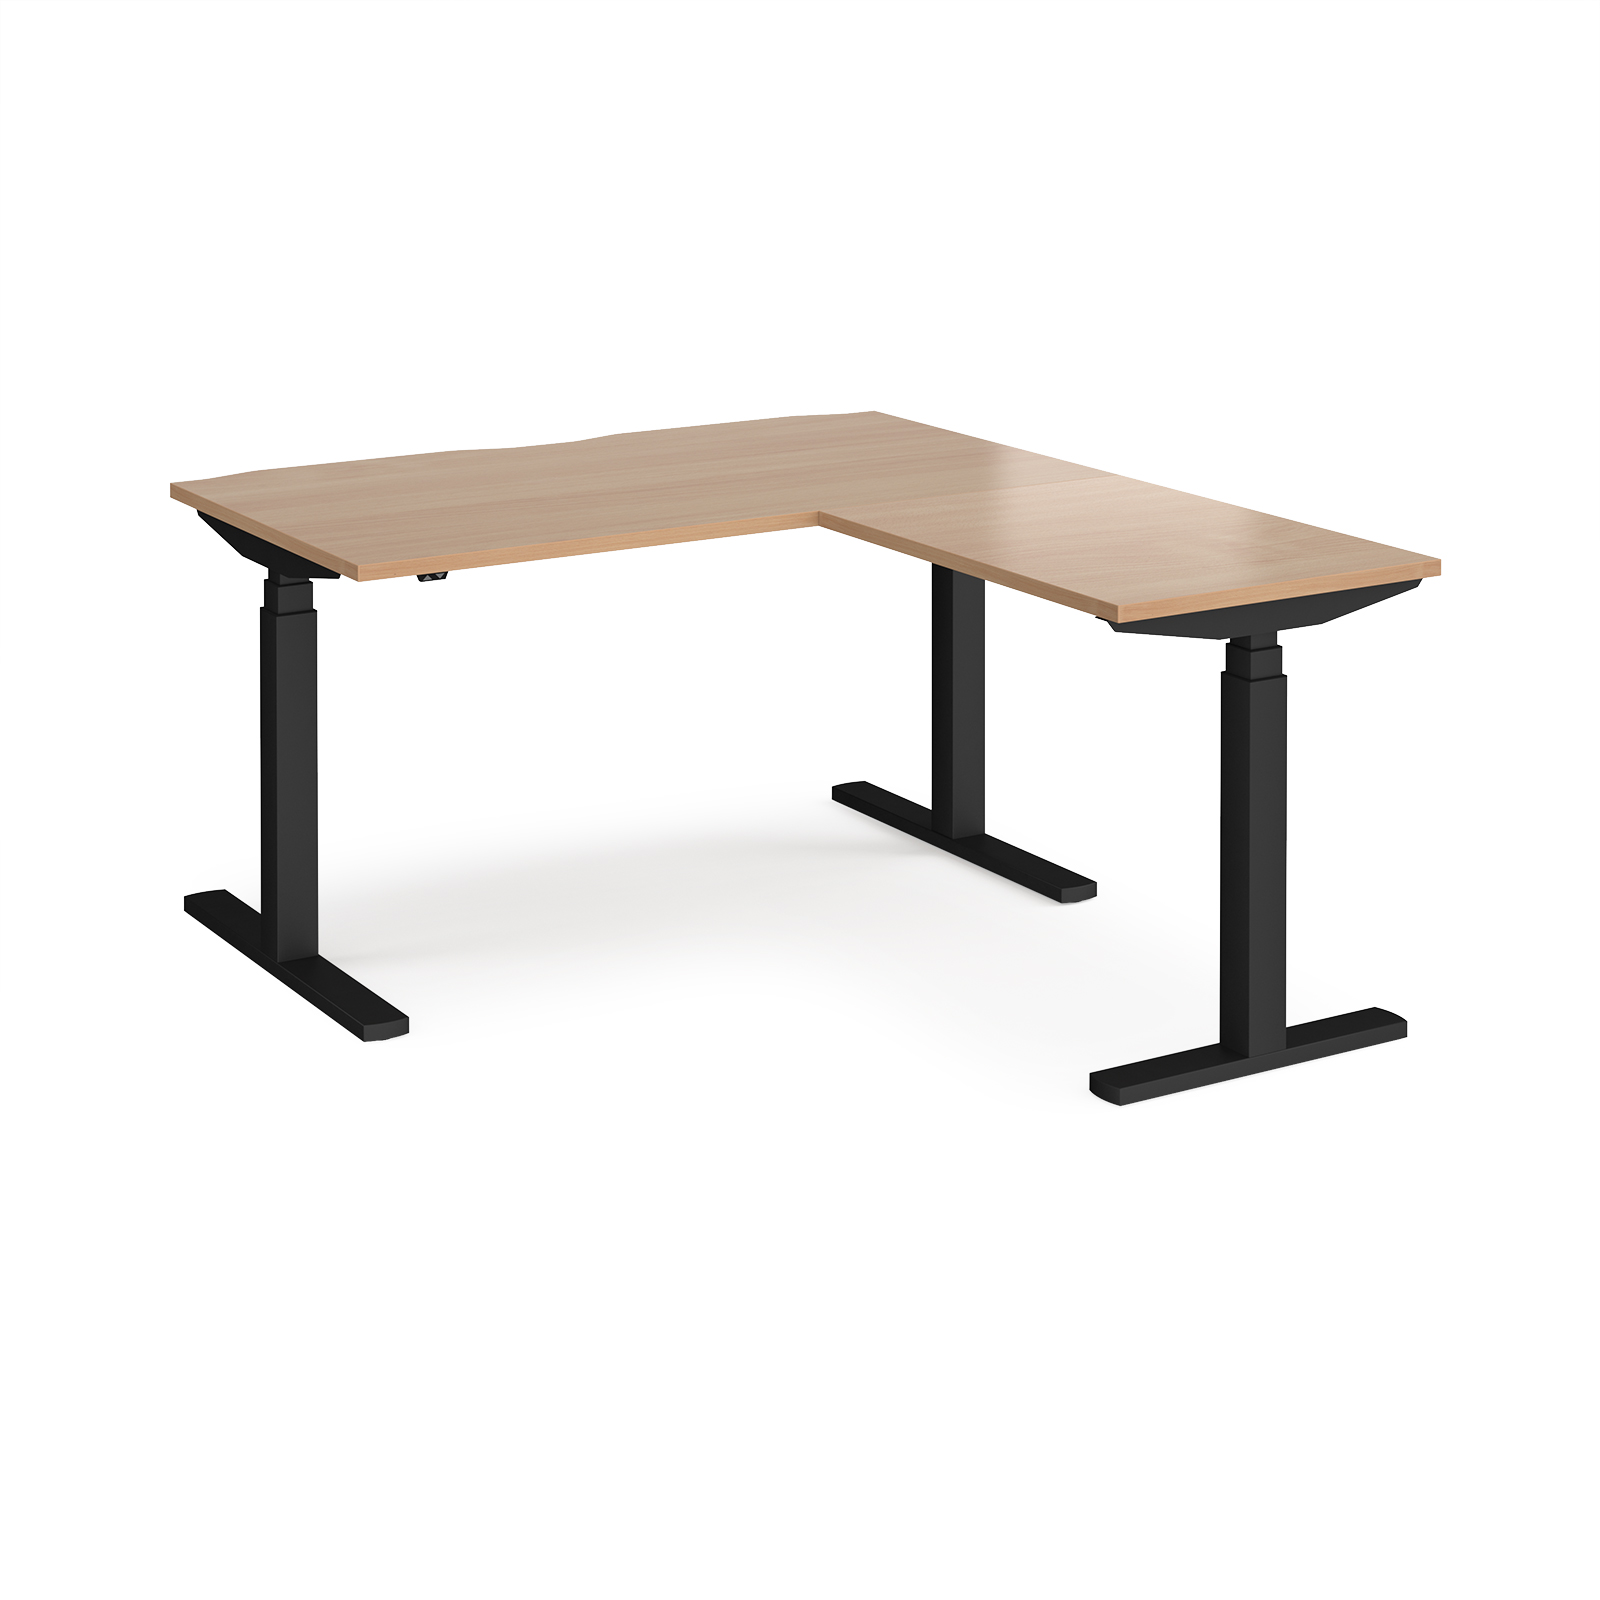 Elev8 Touch sit-stand desk 1400mm x 800mm with 800mm return desk - black frame, beech top